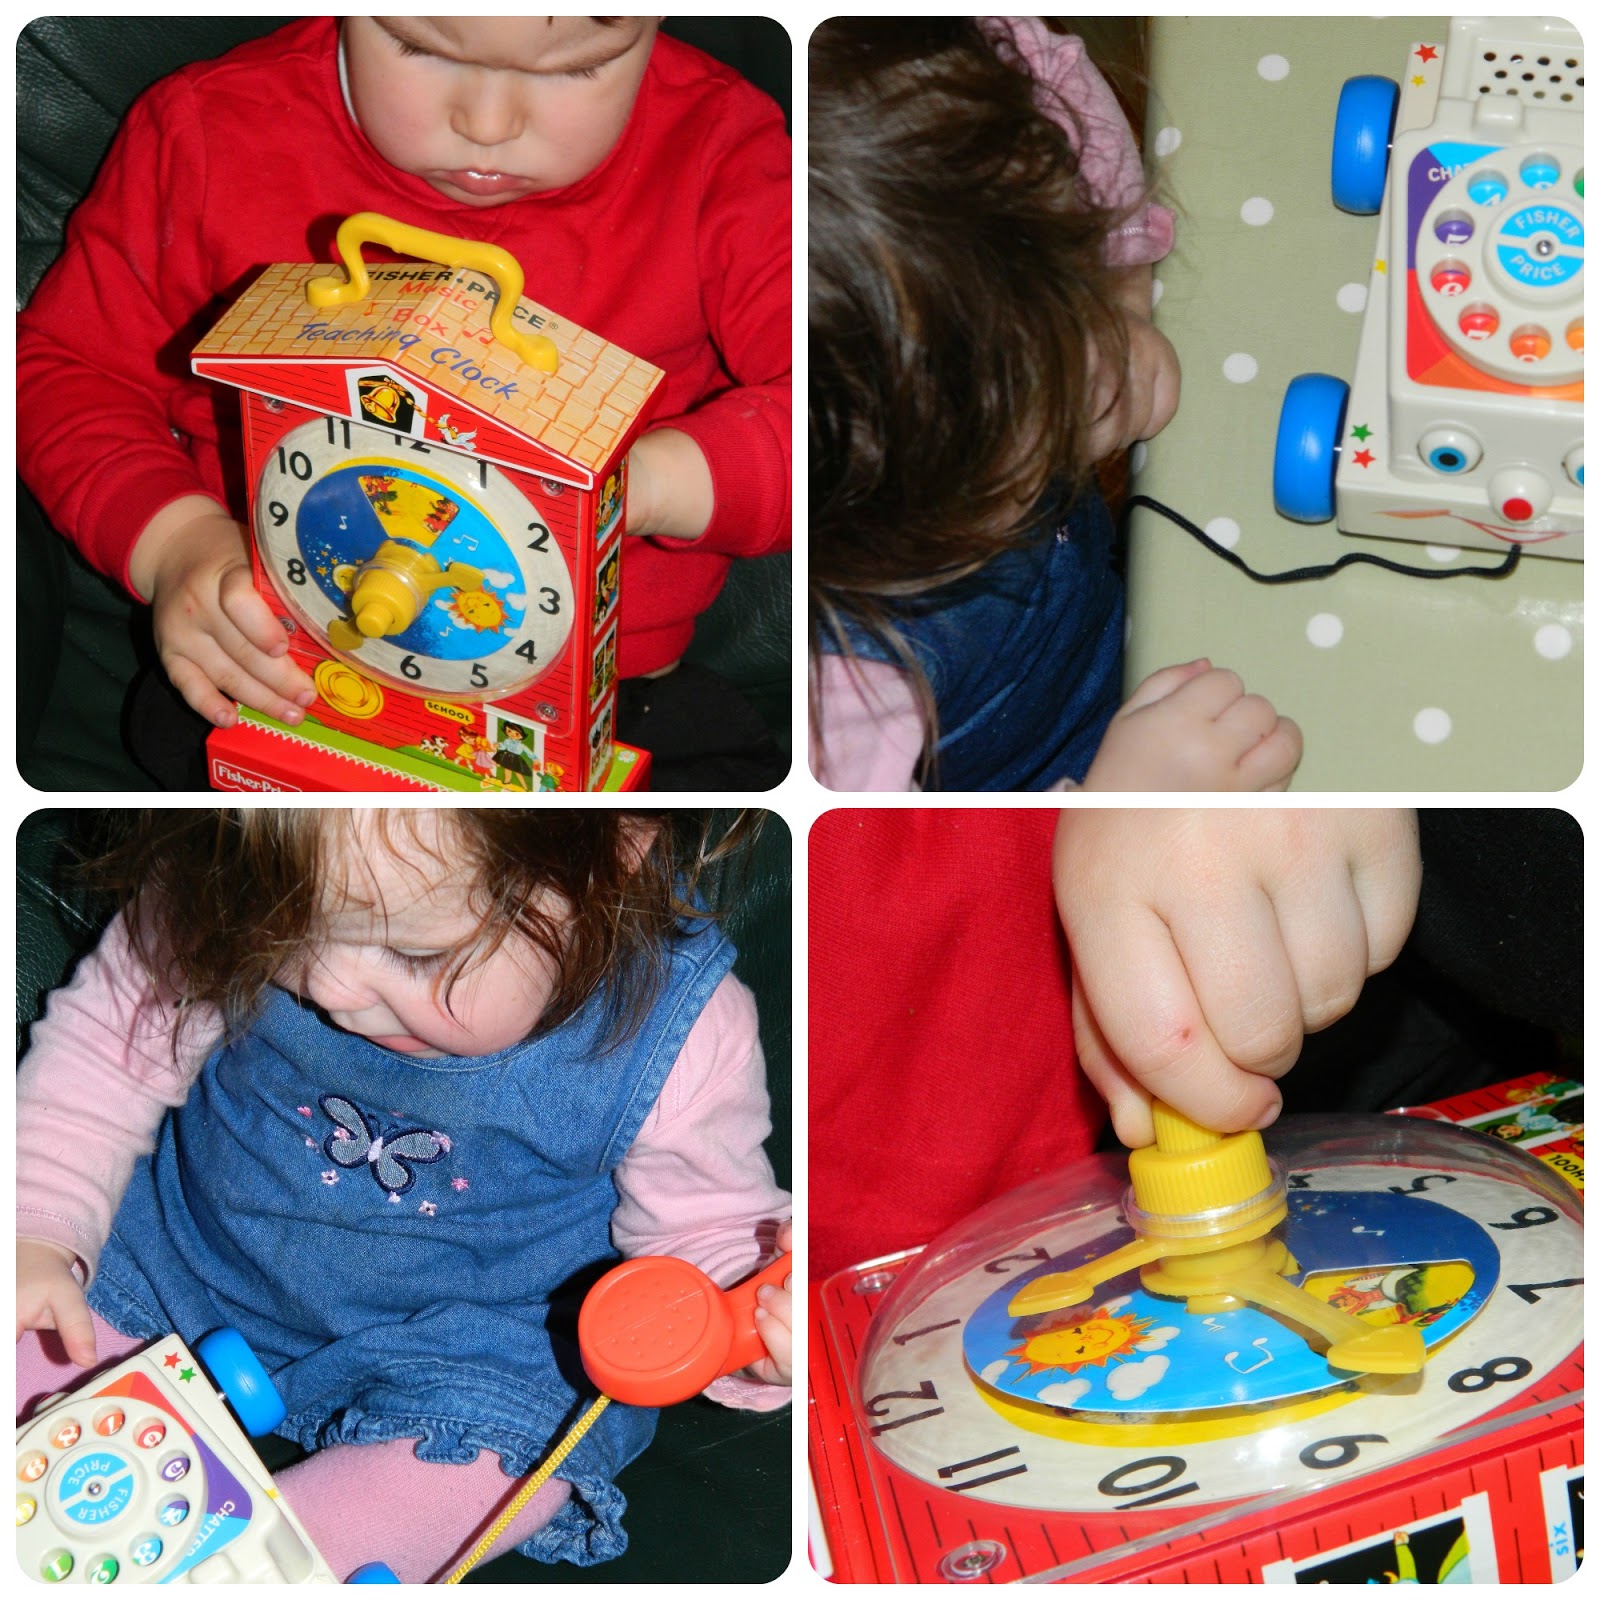 Bud and Little Miss playing with the Fisher-Price Retro Classics Chatter Telephone and Music Box Teaching Clock